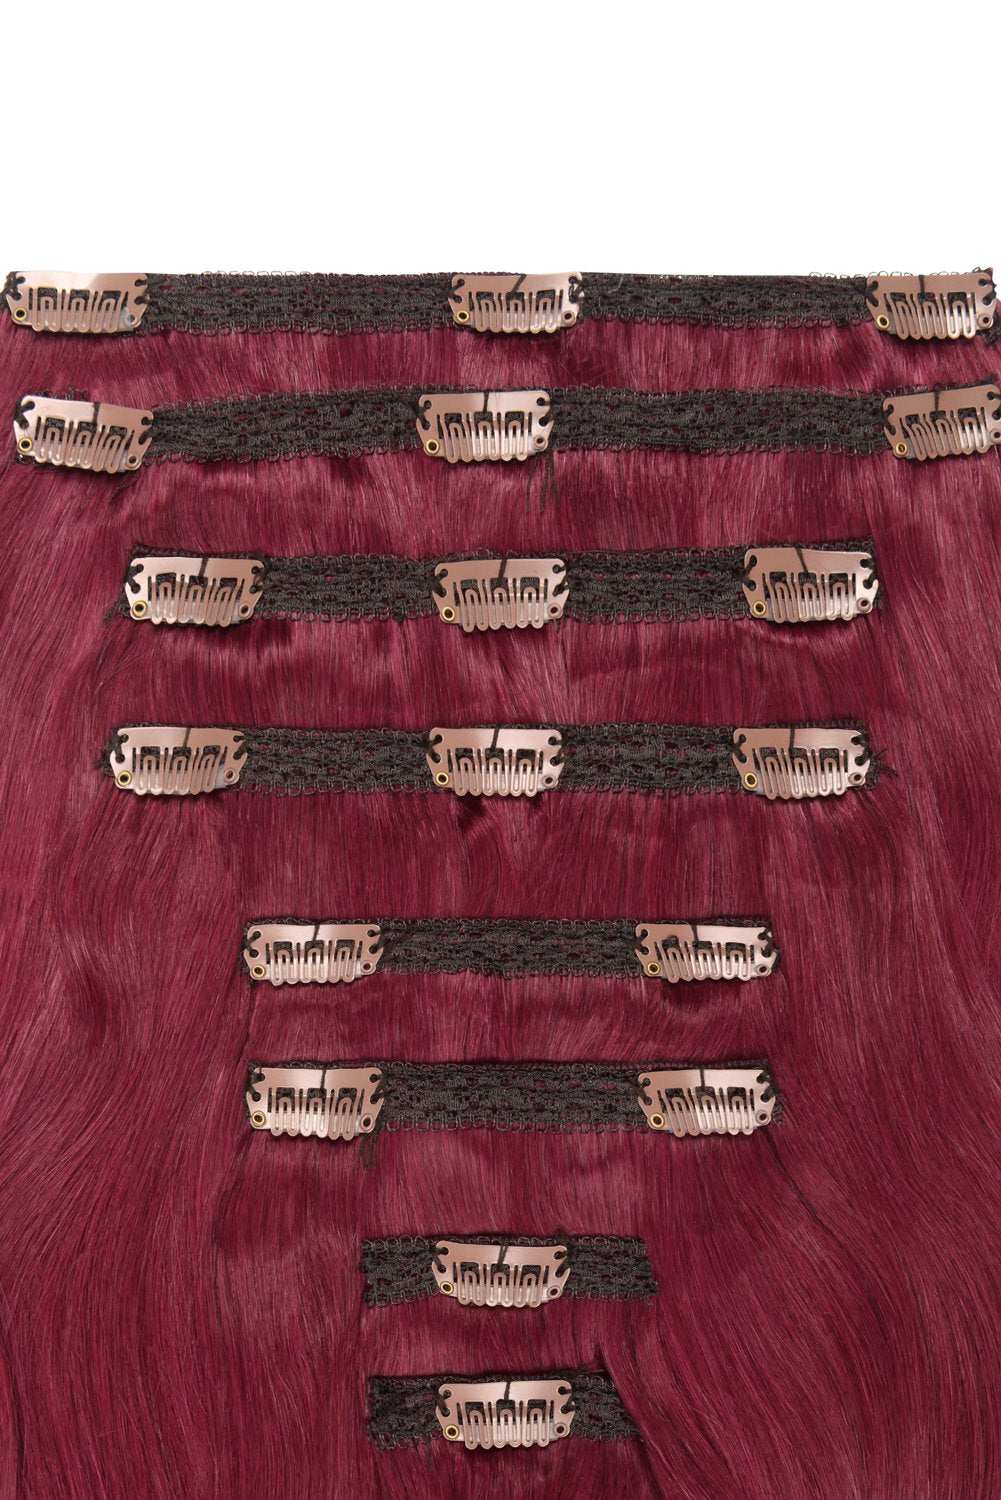 Double Wefted Full Head Remy Clip in Human Hair Extensions - Plum/Cherry Red (#530)